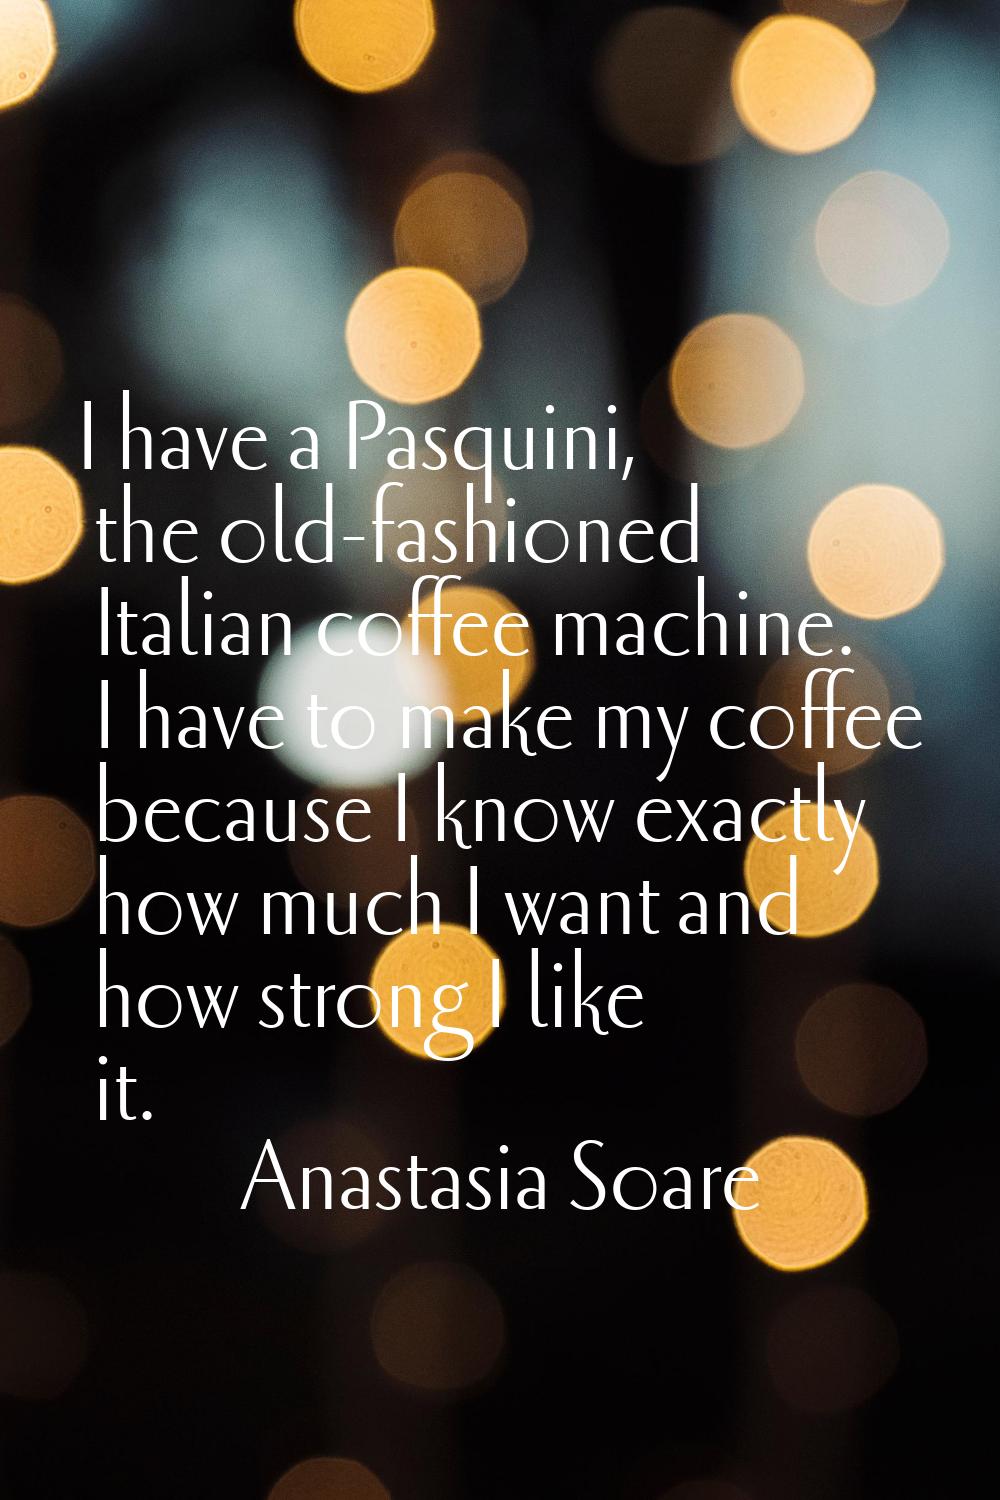 I have a Pasquini, the old-fashioned Italian coffee machine. I have to make my coffee because I kno